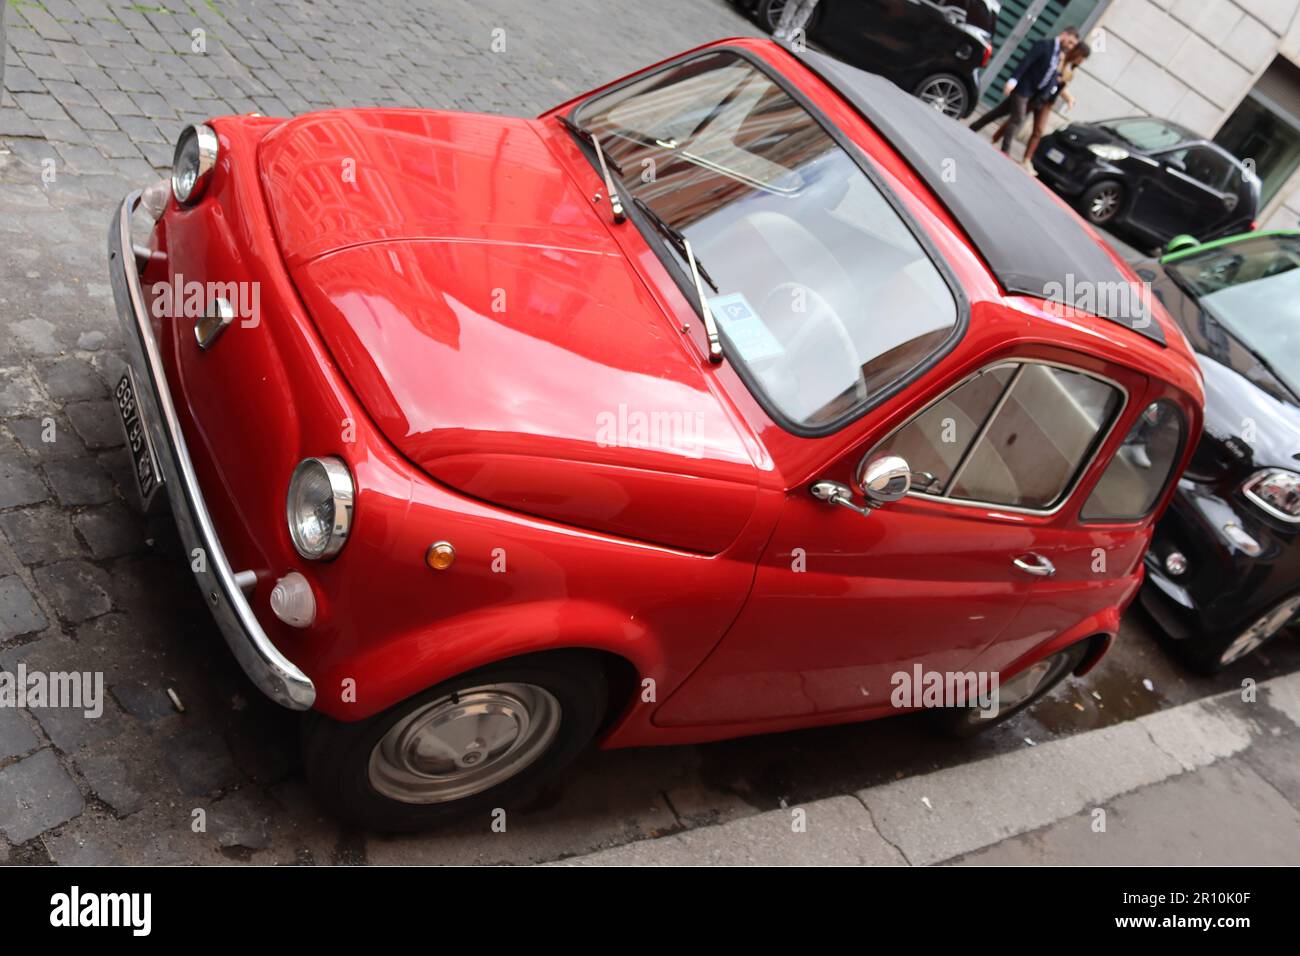 A restored 1965 Fiat Nuova 500 “Cinquecento” advertised for sale at €5000 in a Rome side street, April 2023. Stock Photo